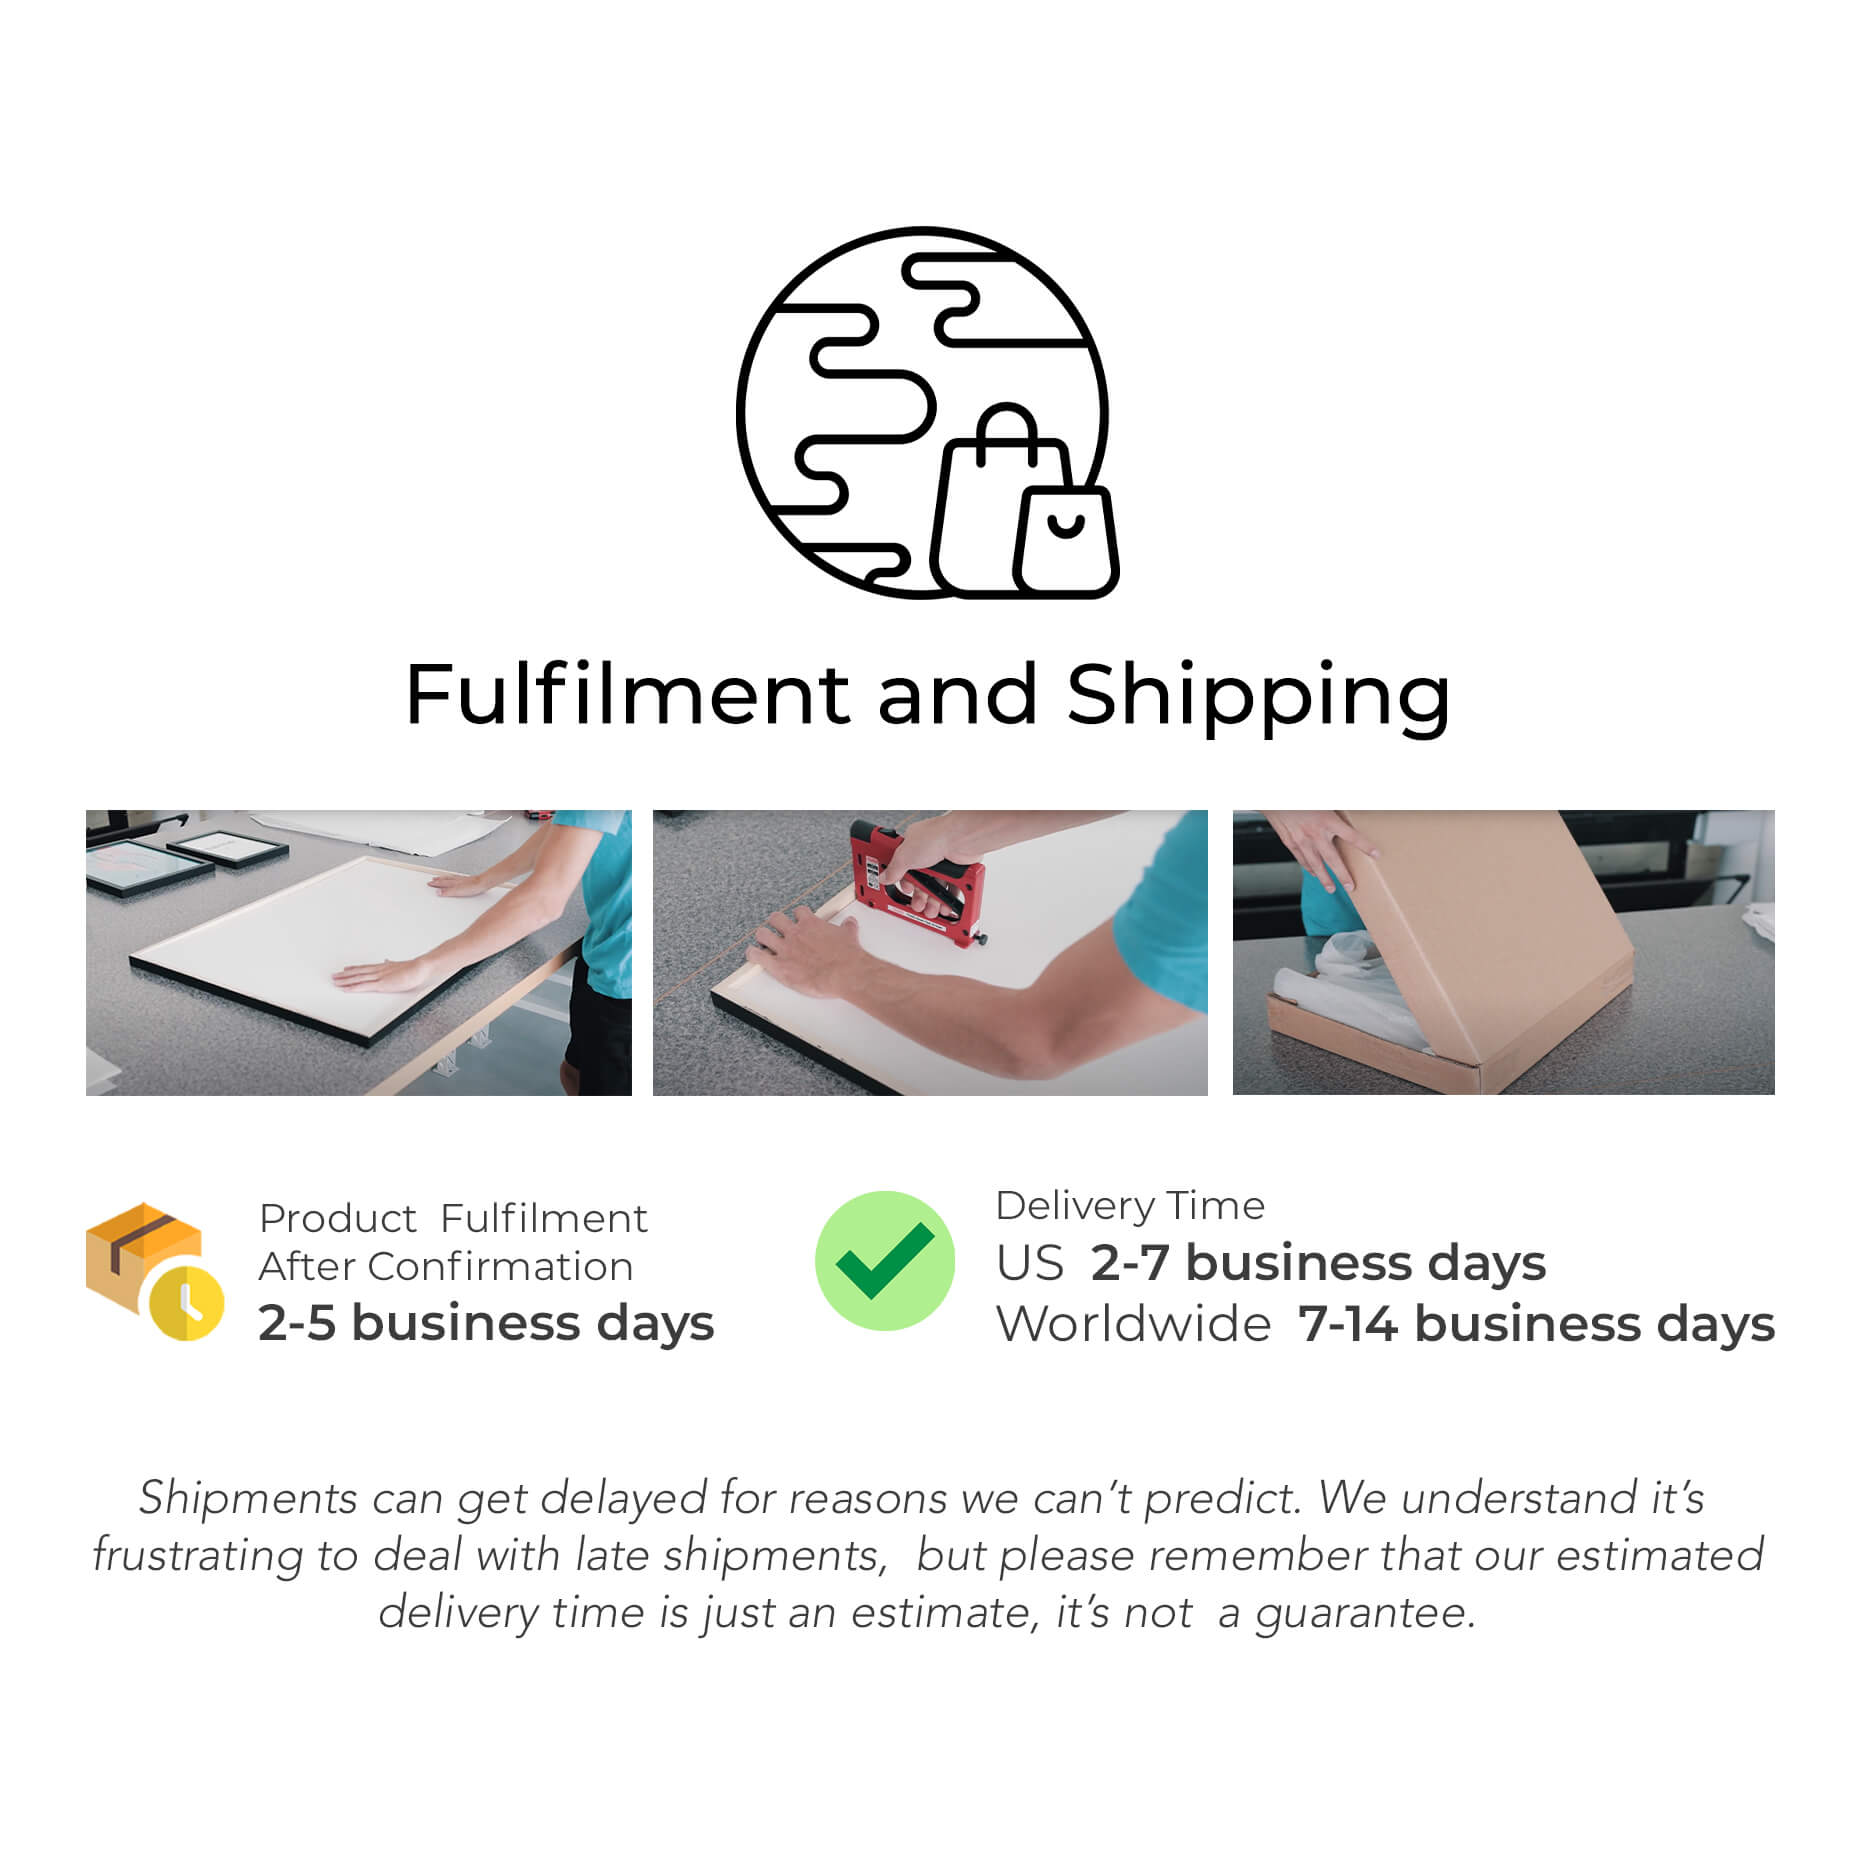 fulfilfment and shipping